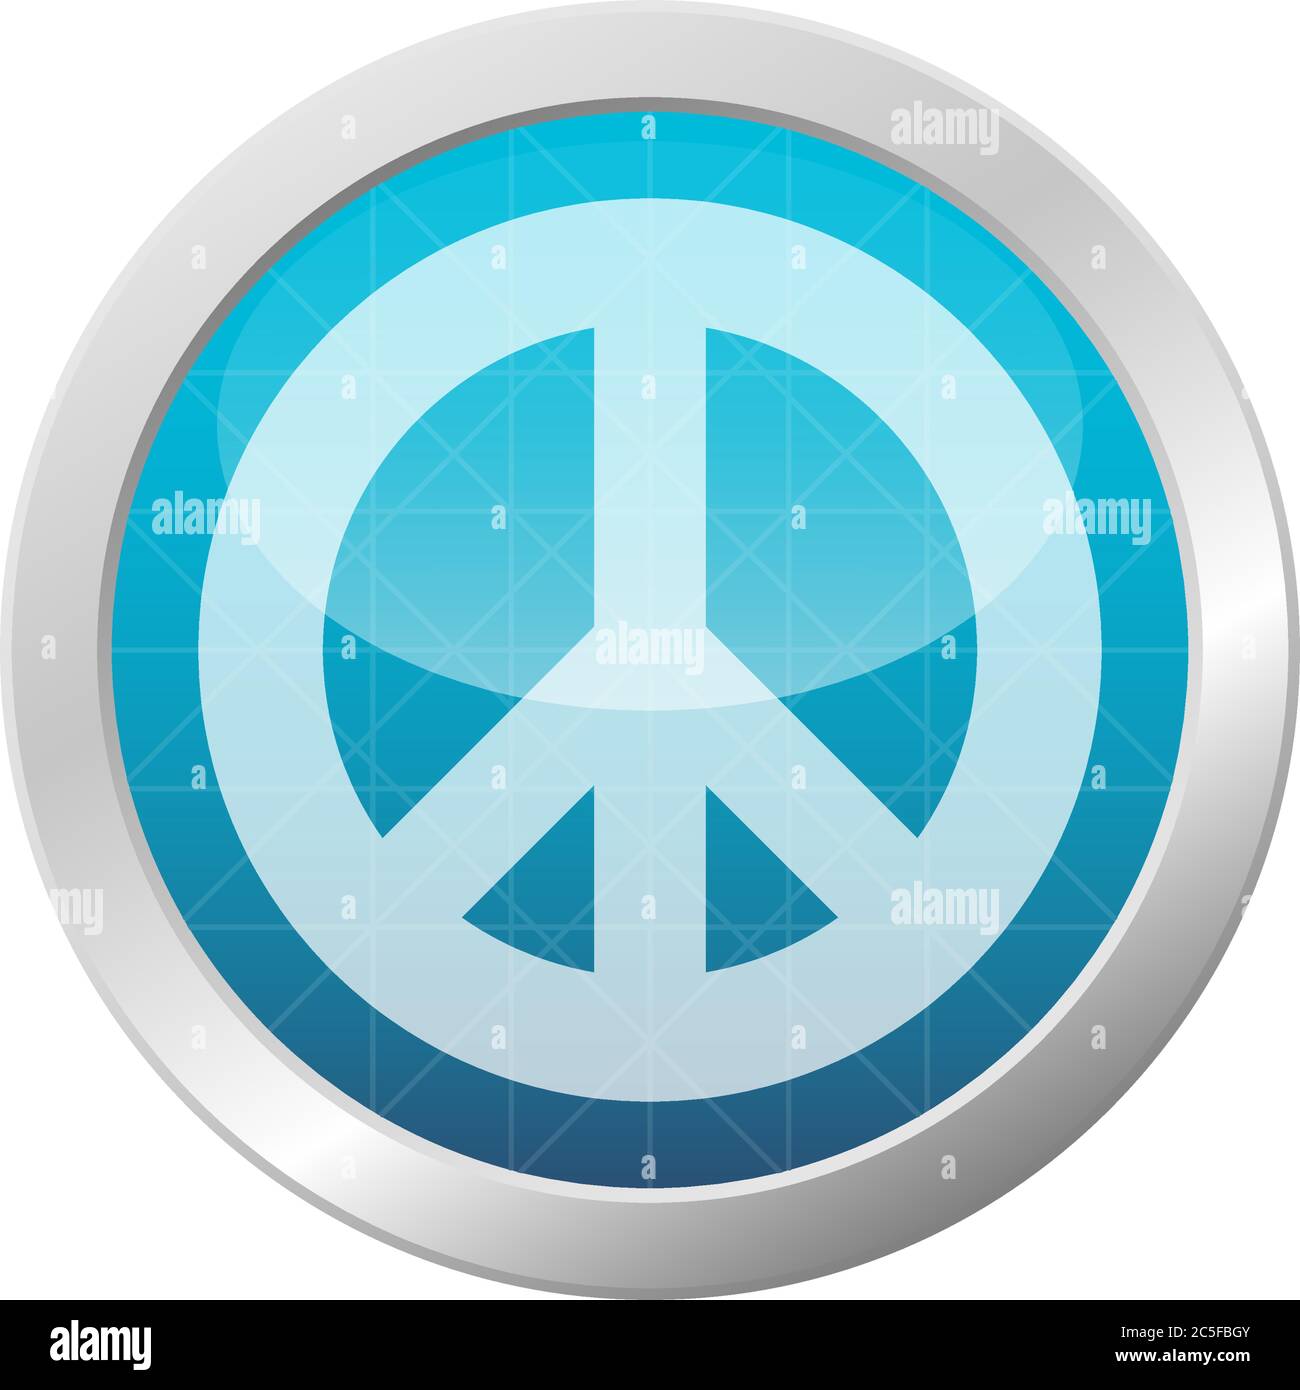 Peace and love symbol vector antiwar pacifism icon hippie culture sign on light blue circle frame illustration Stock Vector